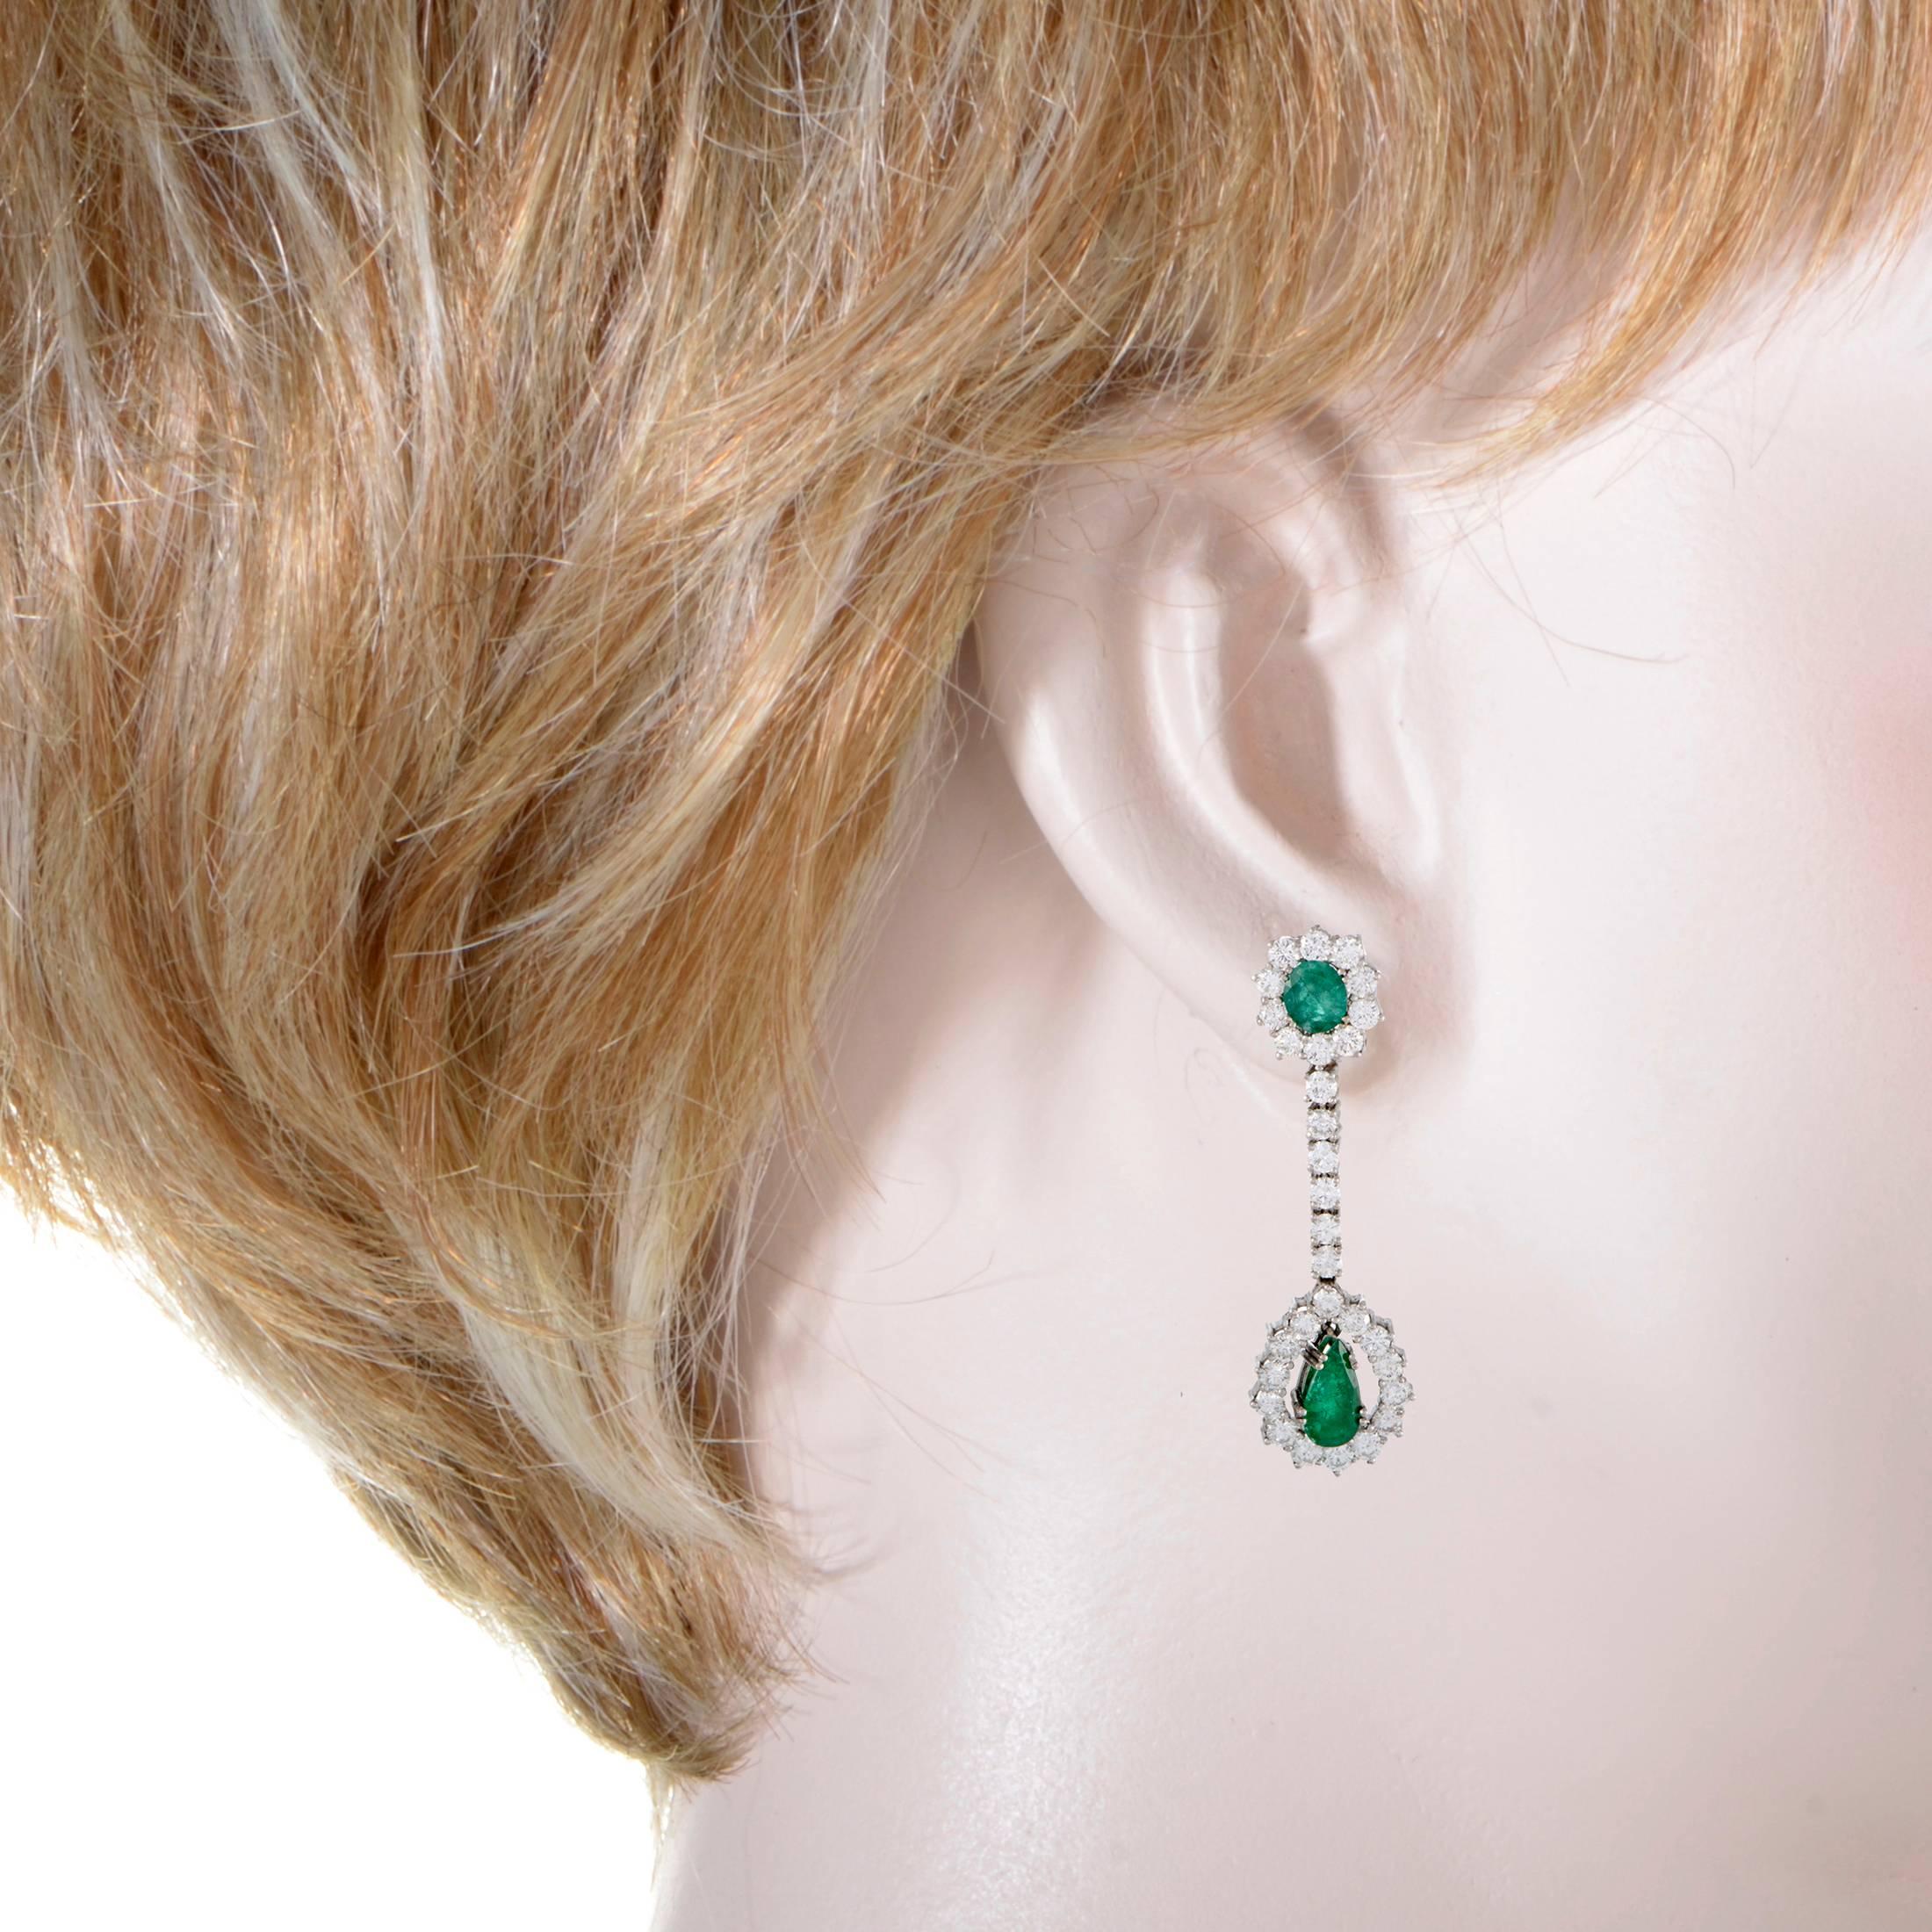 Wonderfully designed and luxuriously embellished, these gorgeous earrings feature an incredibly stylish appeal. The pair is made of elegant 18K white gold and set with resplendent diamonds and emeralds that weigh in total approximately 4.50 carats